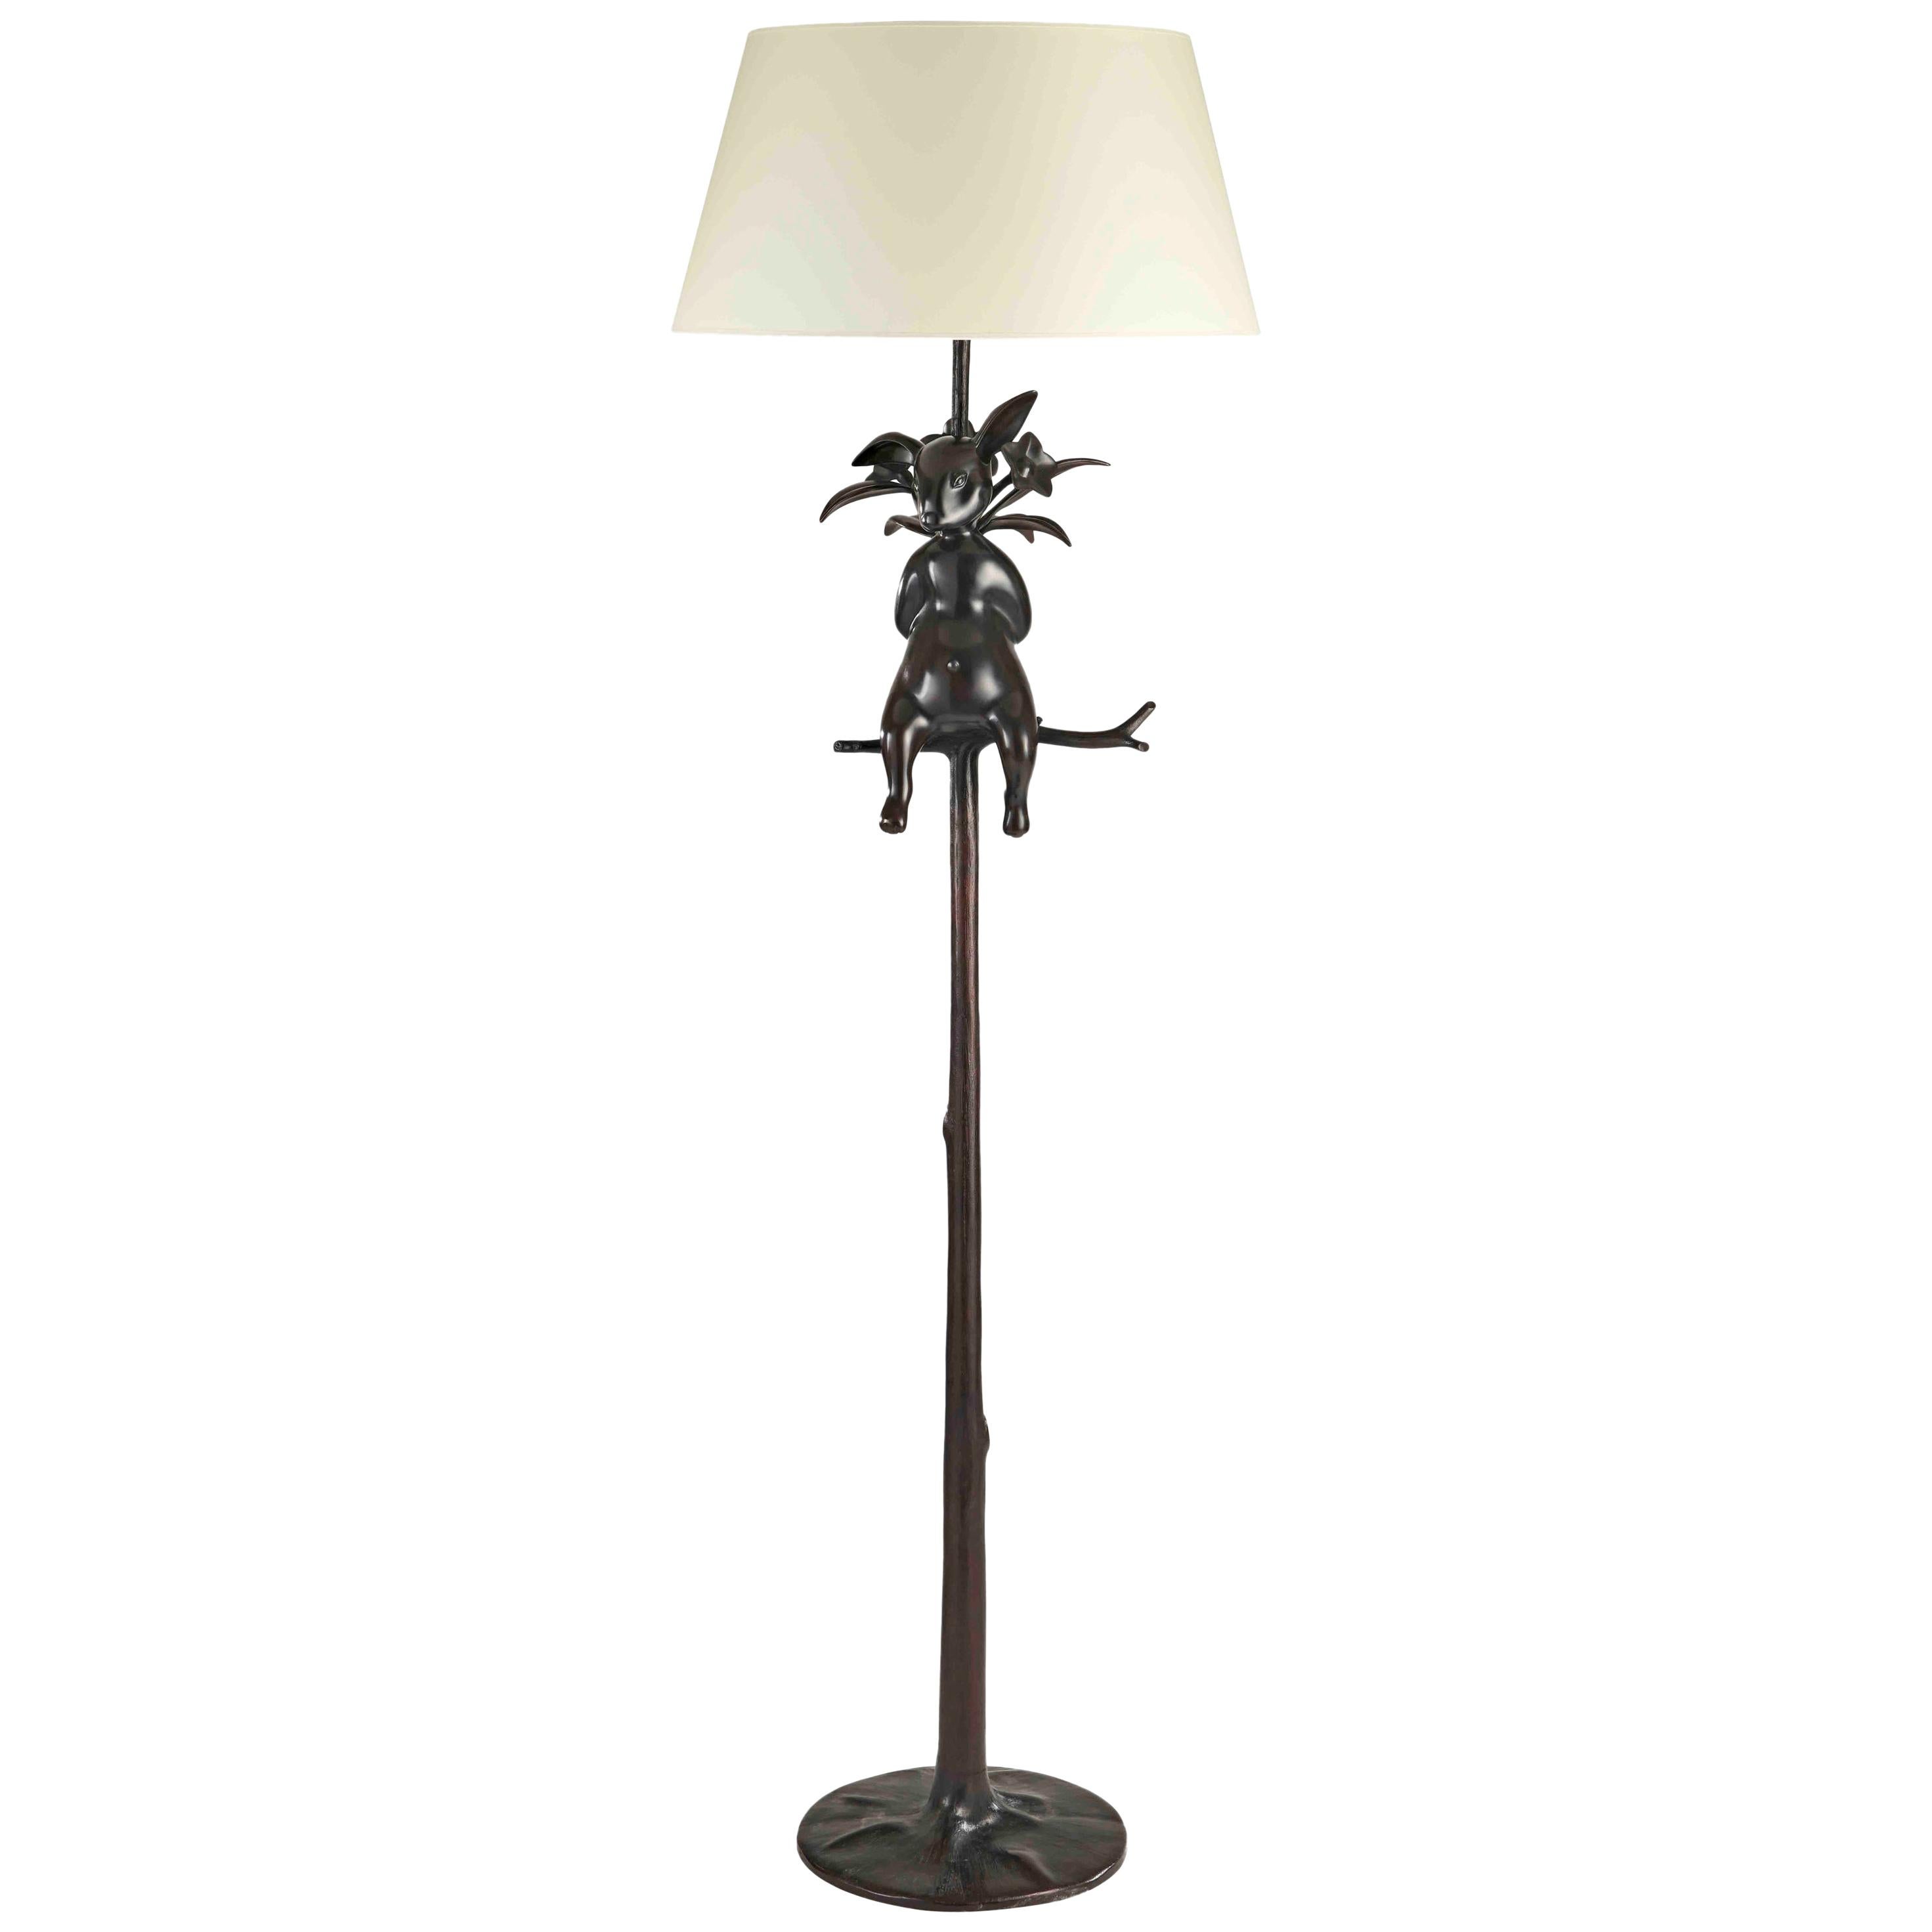 "Hippolyte the Rabbit" Floor Lamp, Hubert le Gall, Limited Edition For Sale